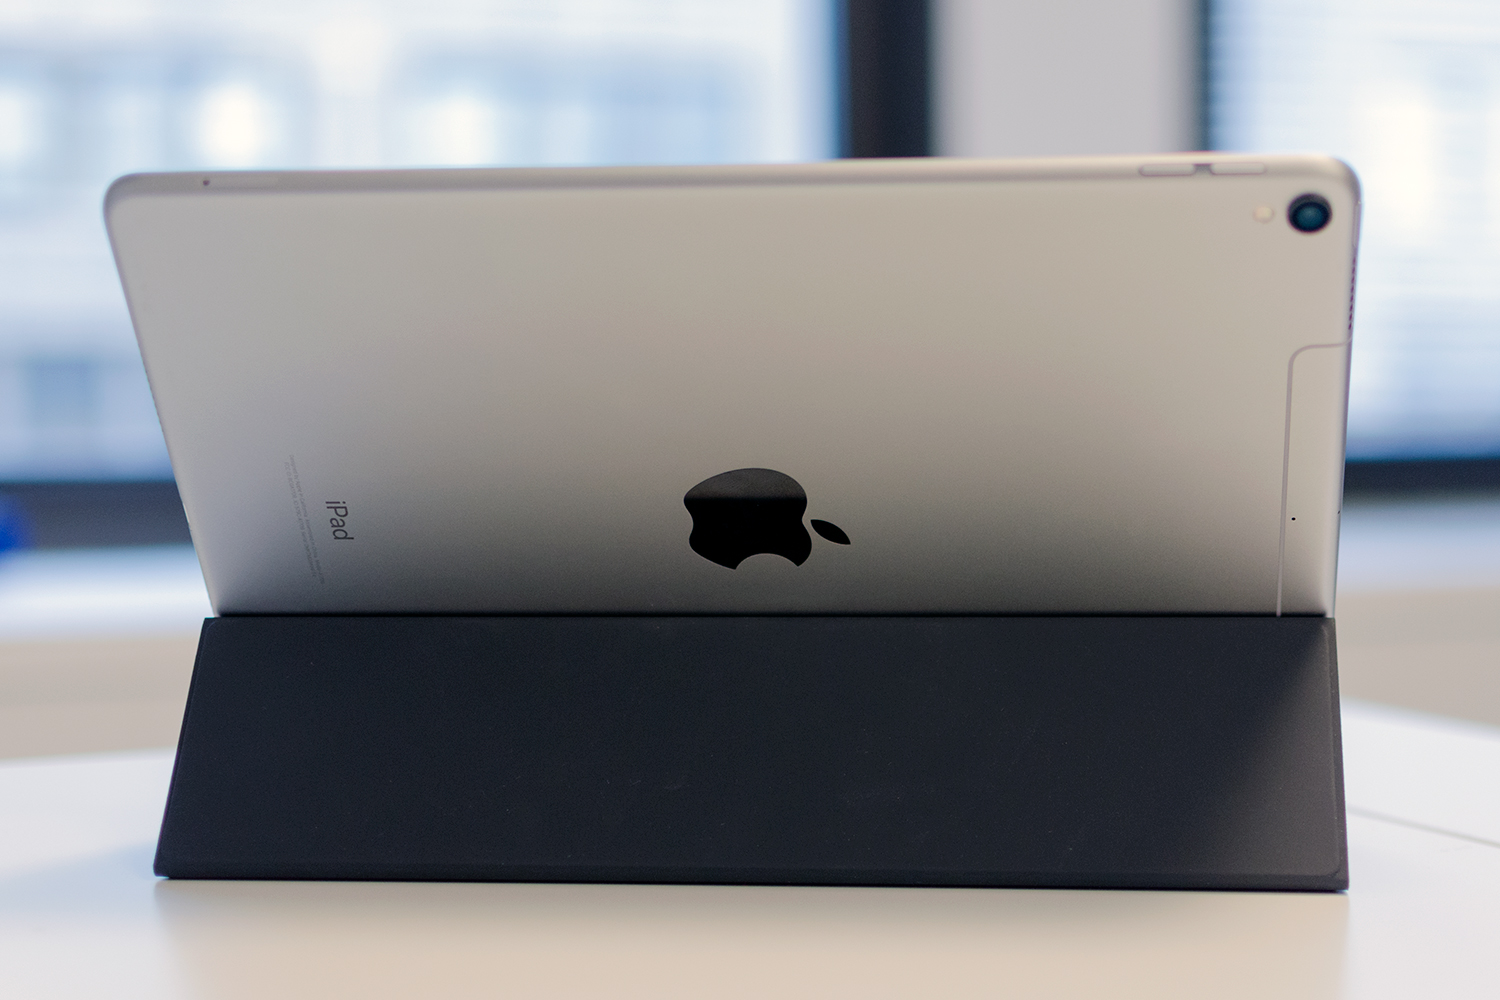 iPad Pro 10.5-inch Review: Bigger Does Mean Better | Digital Trends